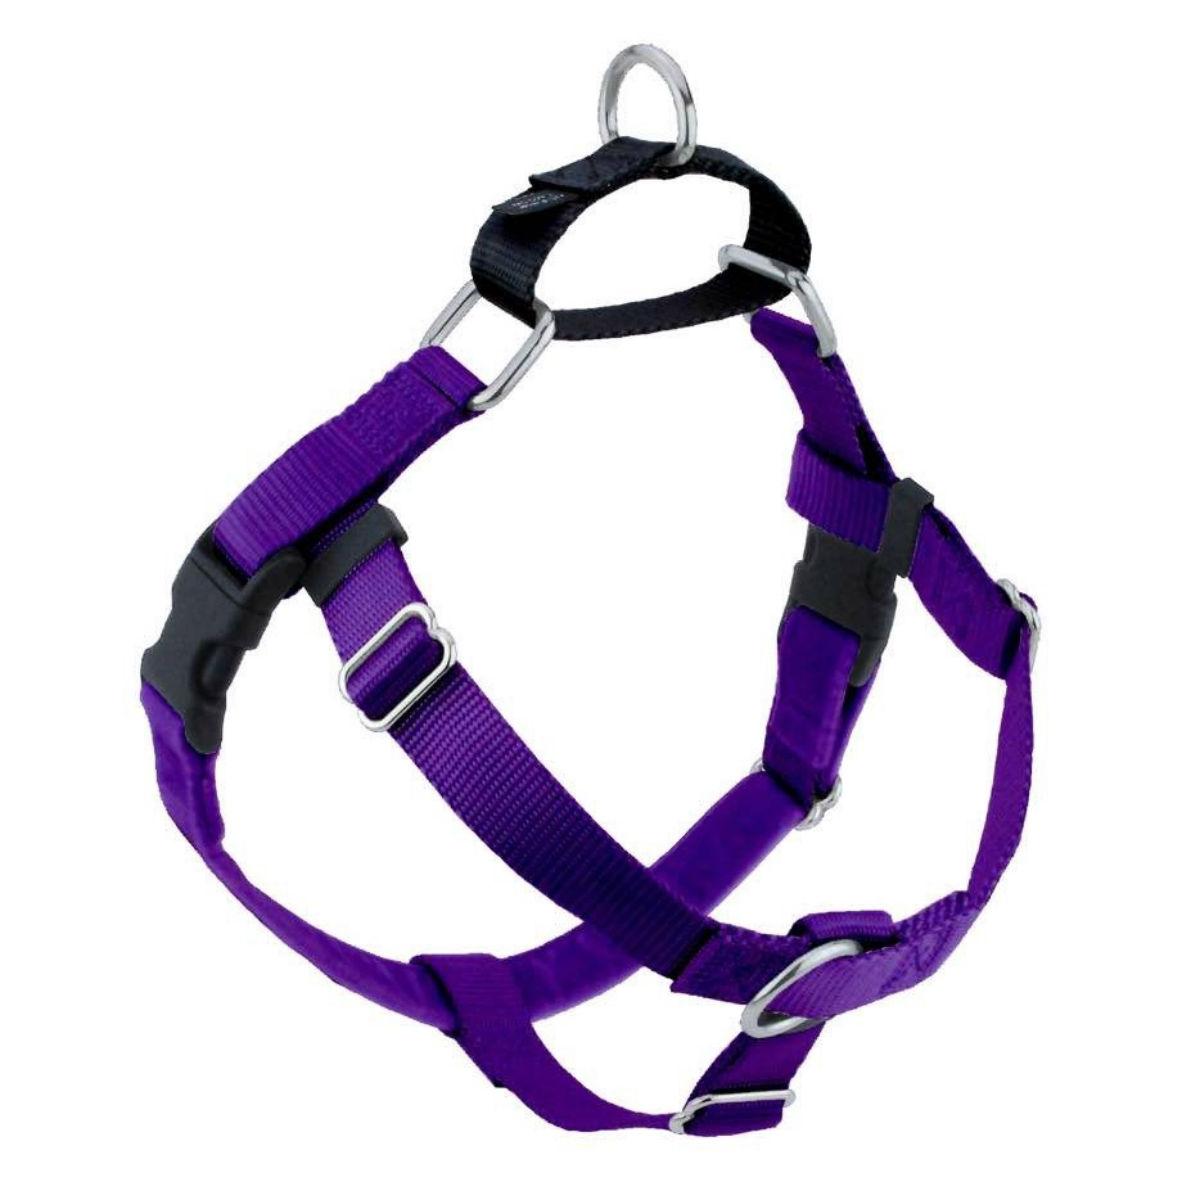 2 Hounds Design No-Pull Dog Harness Deluxe Training Package - Purple and Black